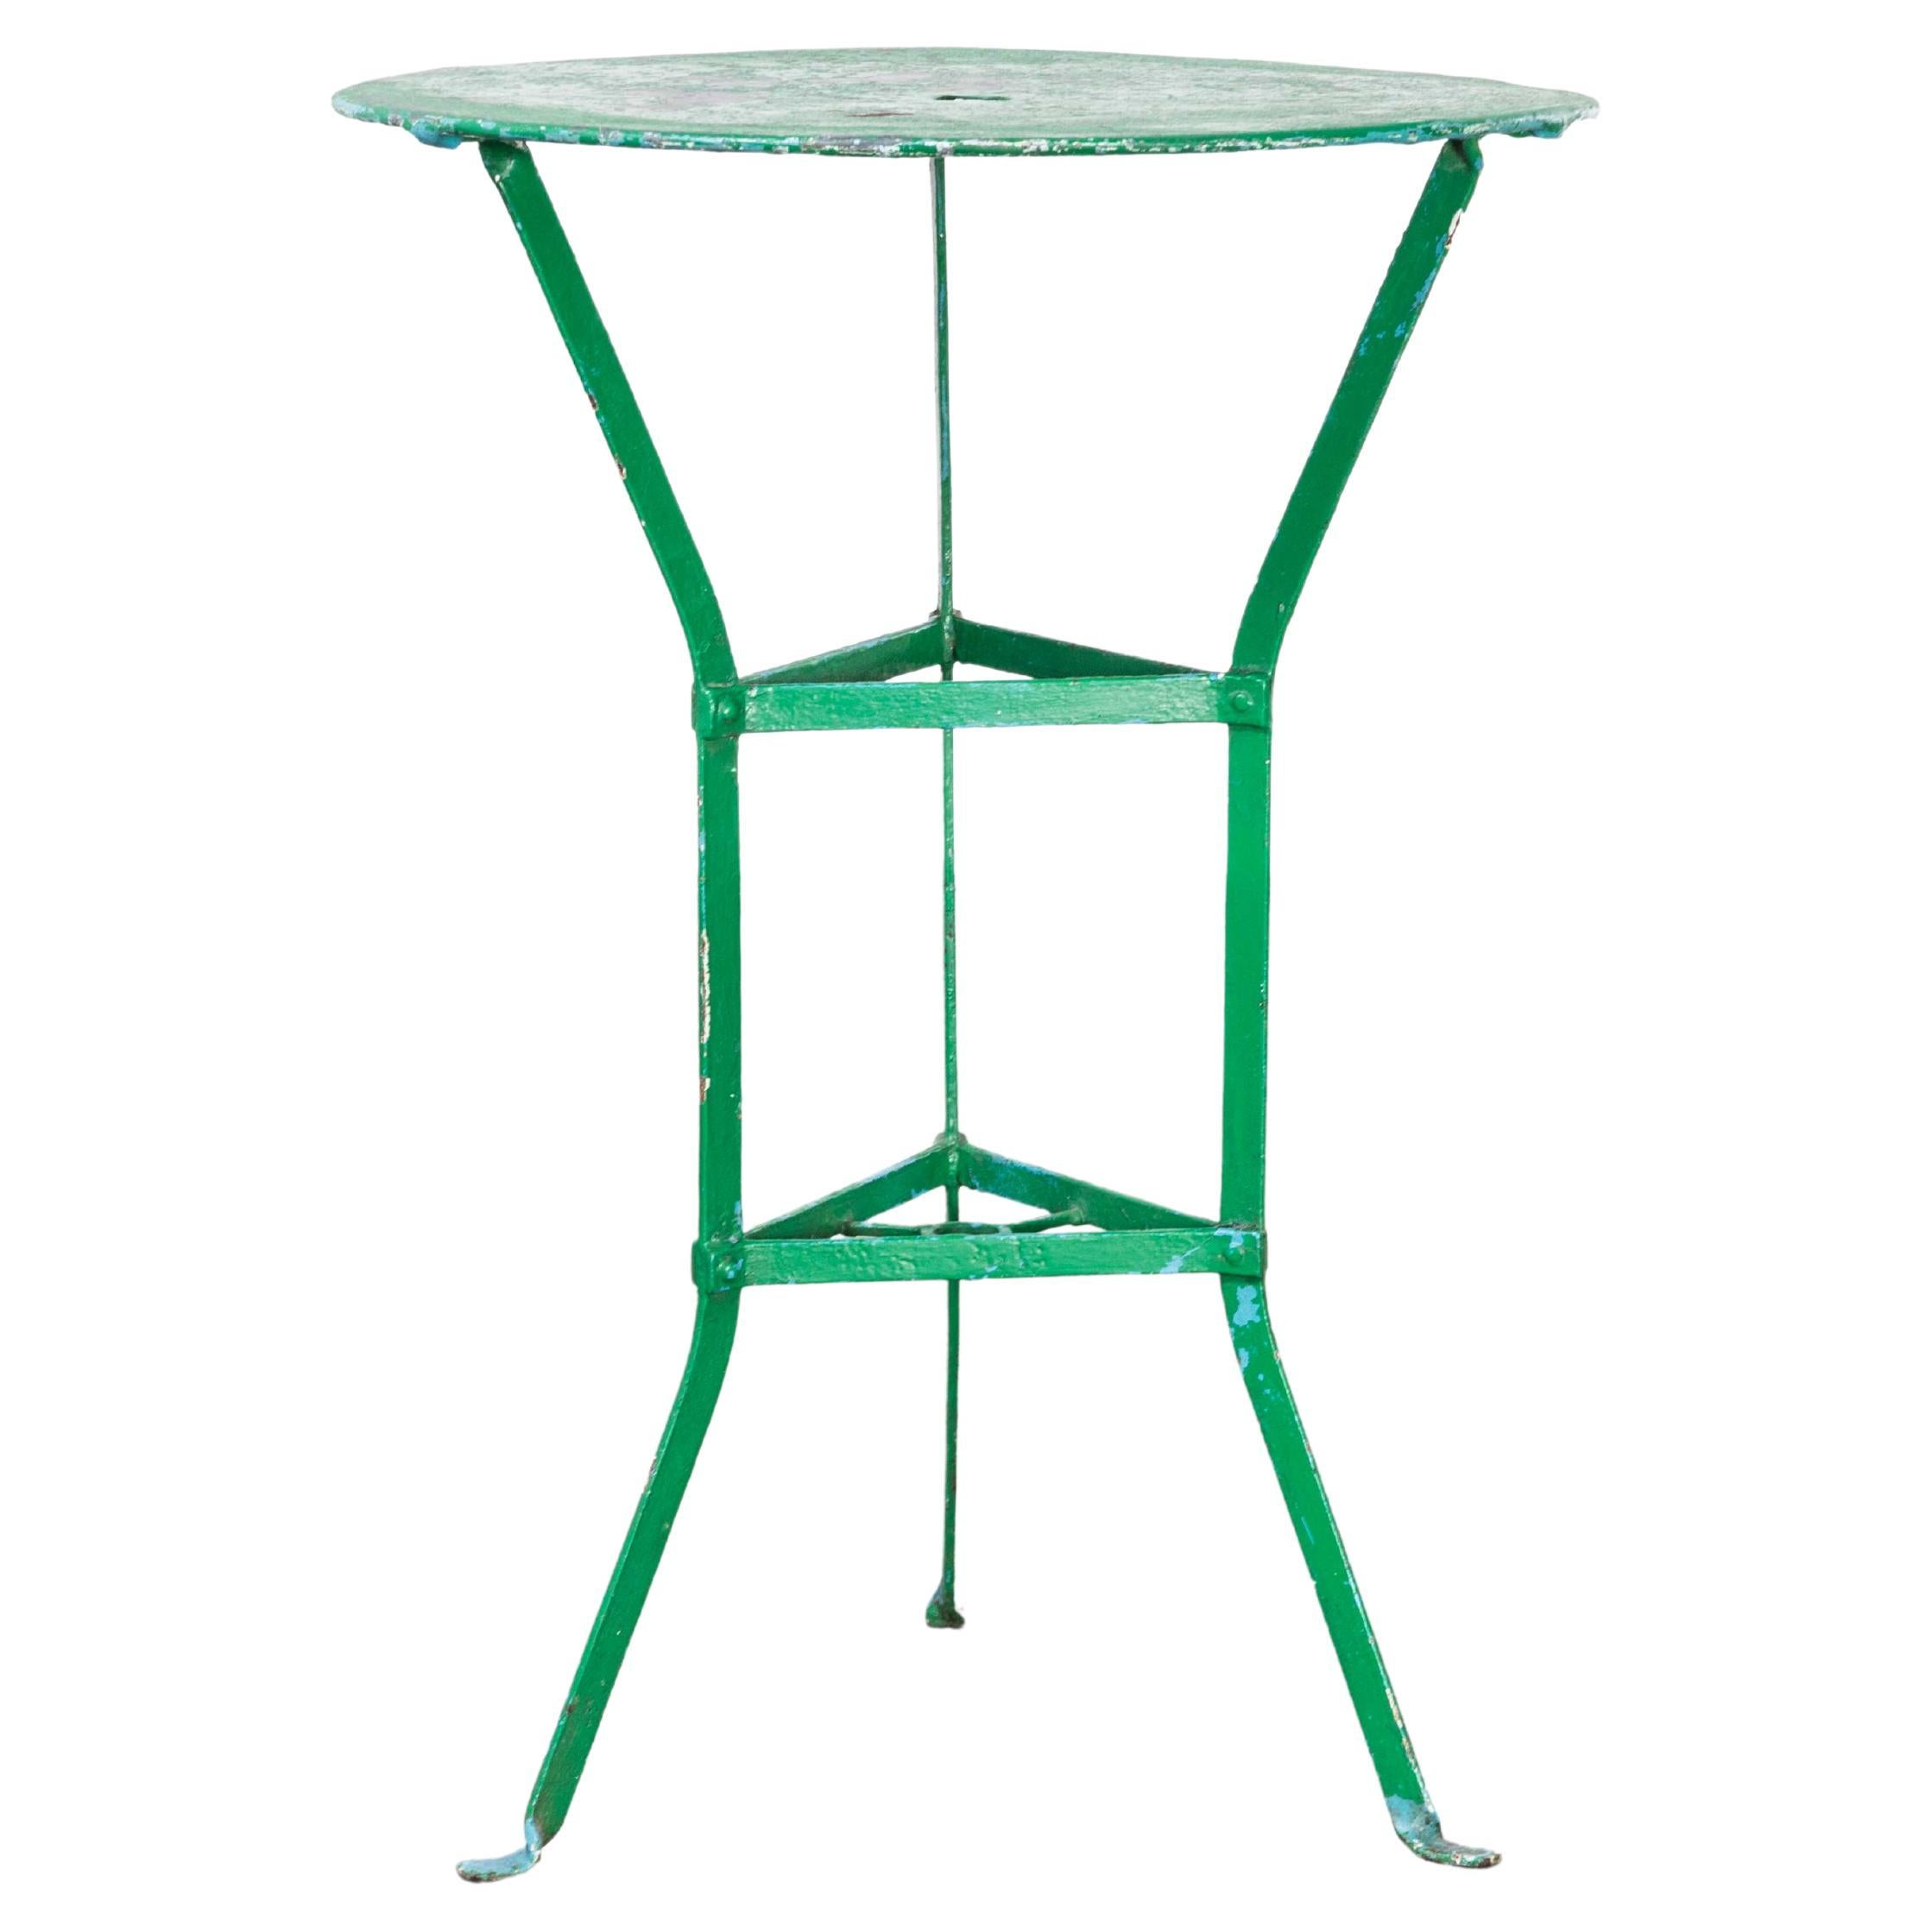 1950's French Small Round Metal Green Gueridon Table For Sale